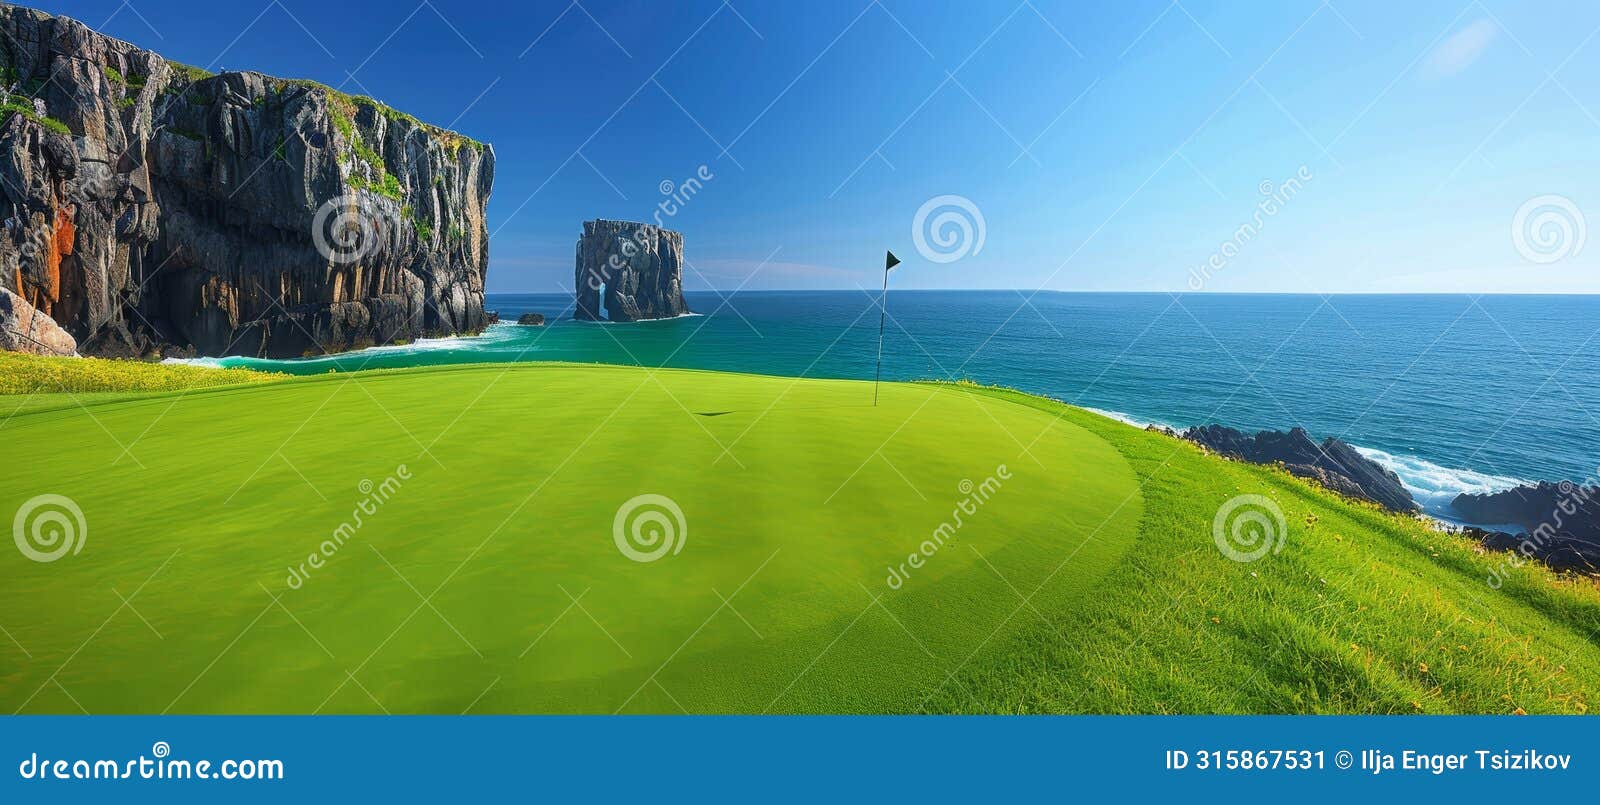 picturesque golf course on white cliffs with ocean vistas and distinctive rock arches